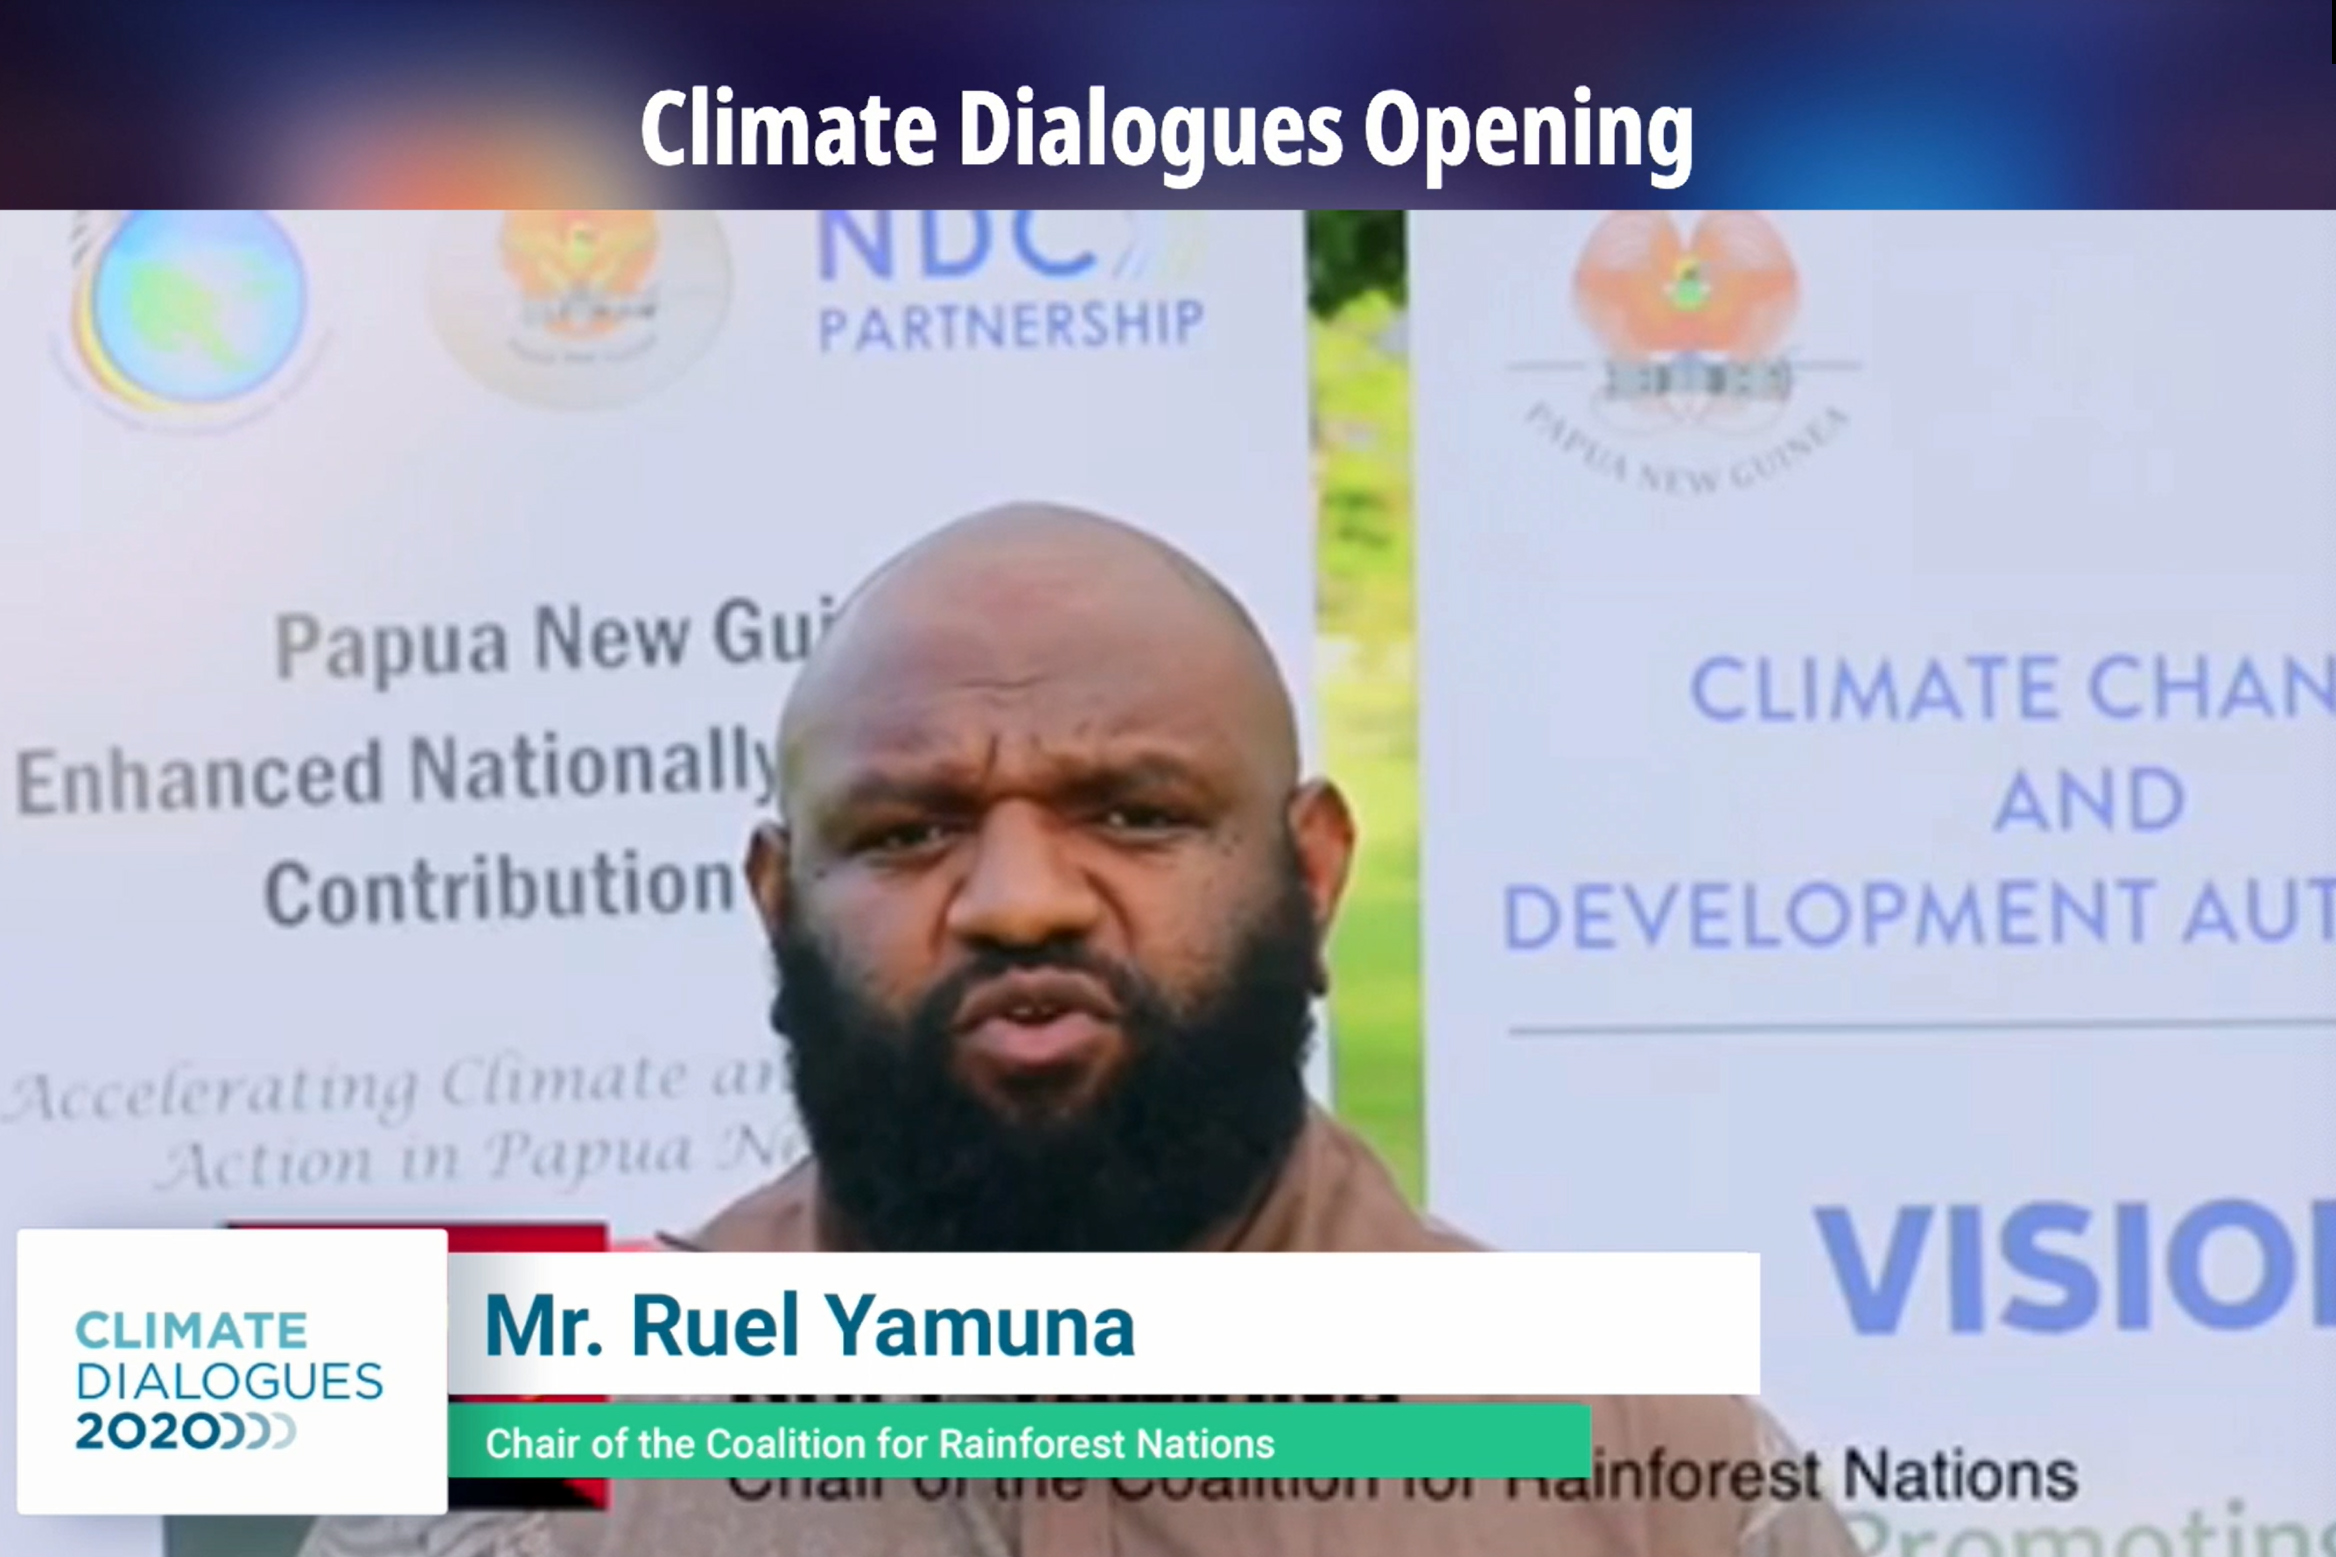 Ruel Yamuna, Papua New Guinea, for the Coalition of Rainforest Nations